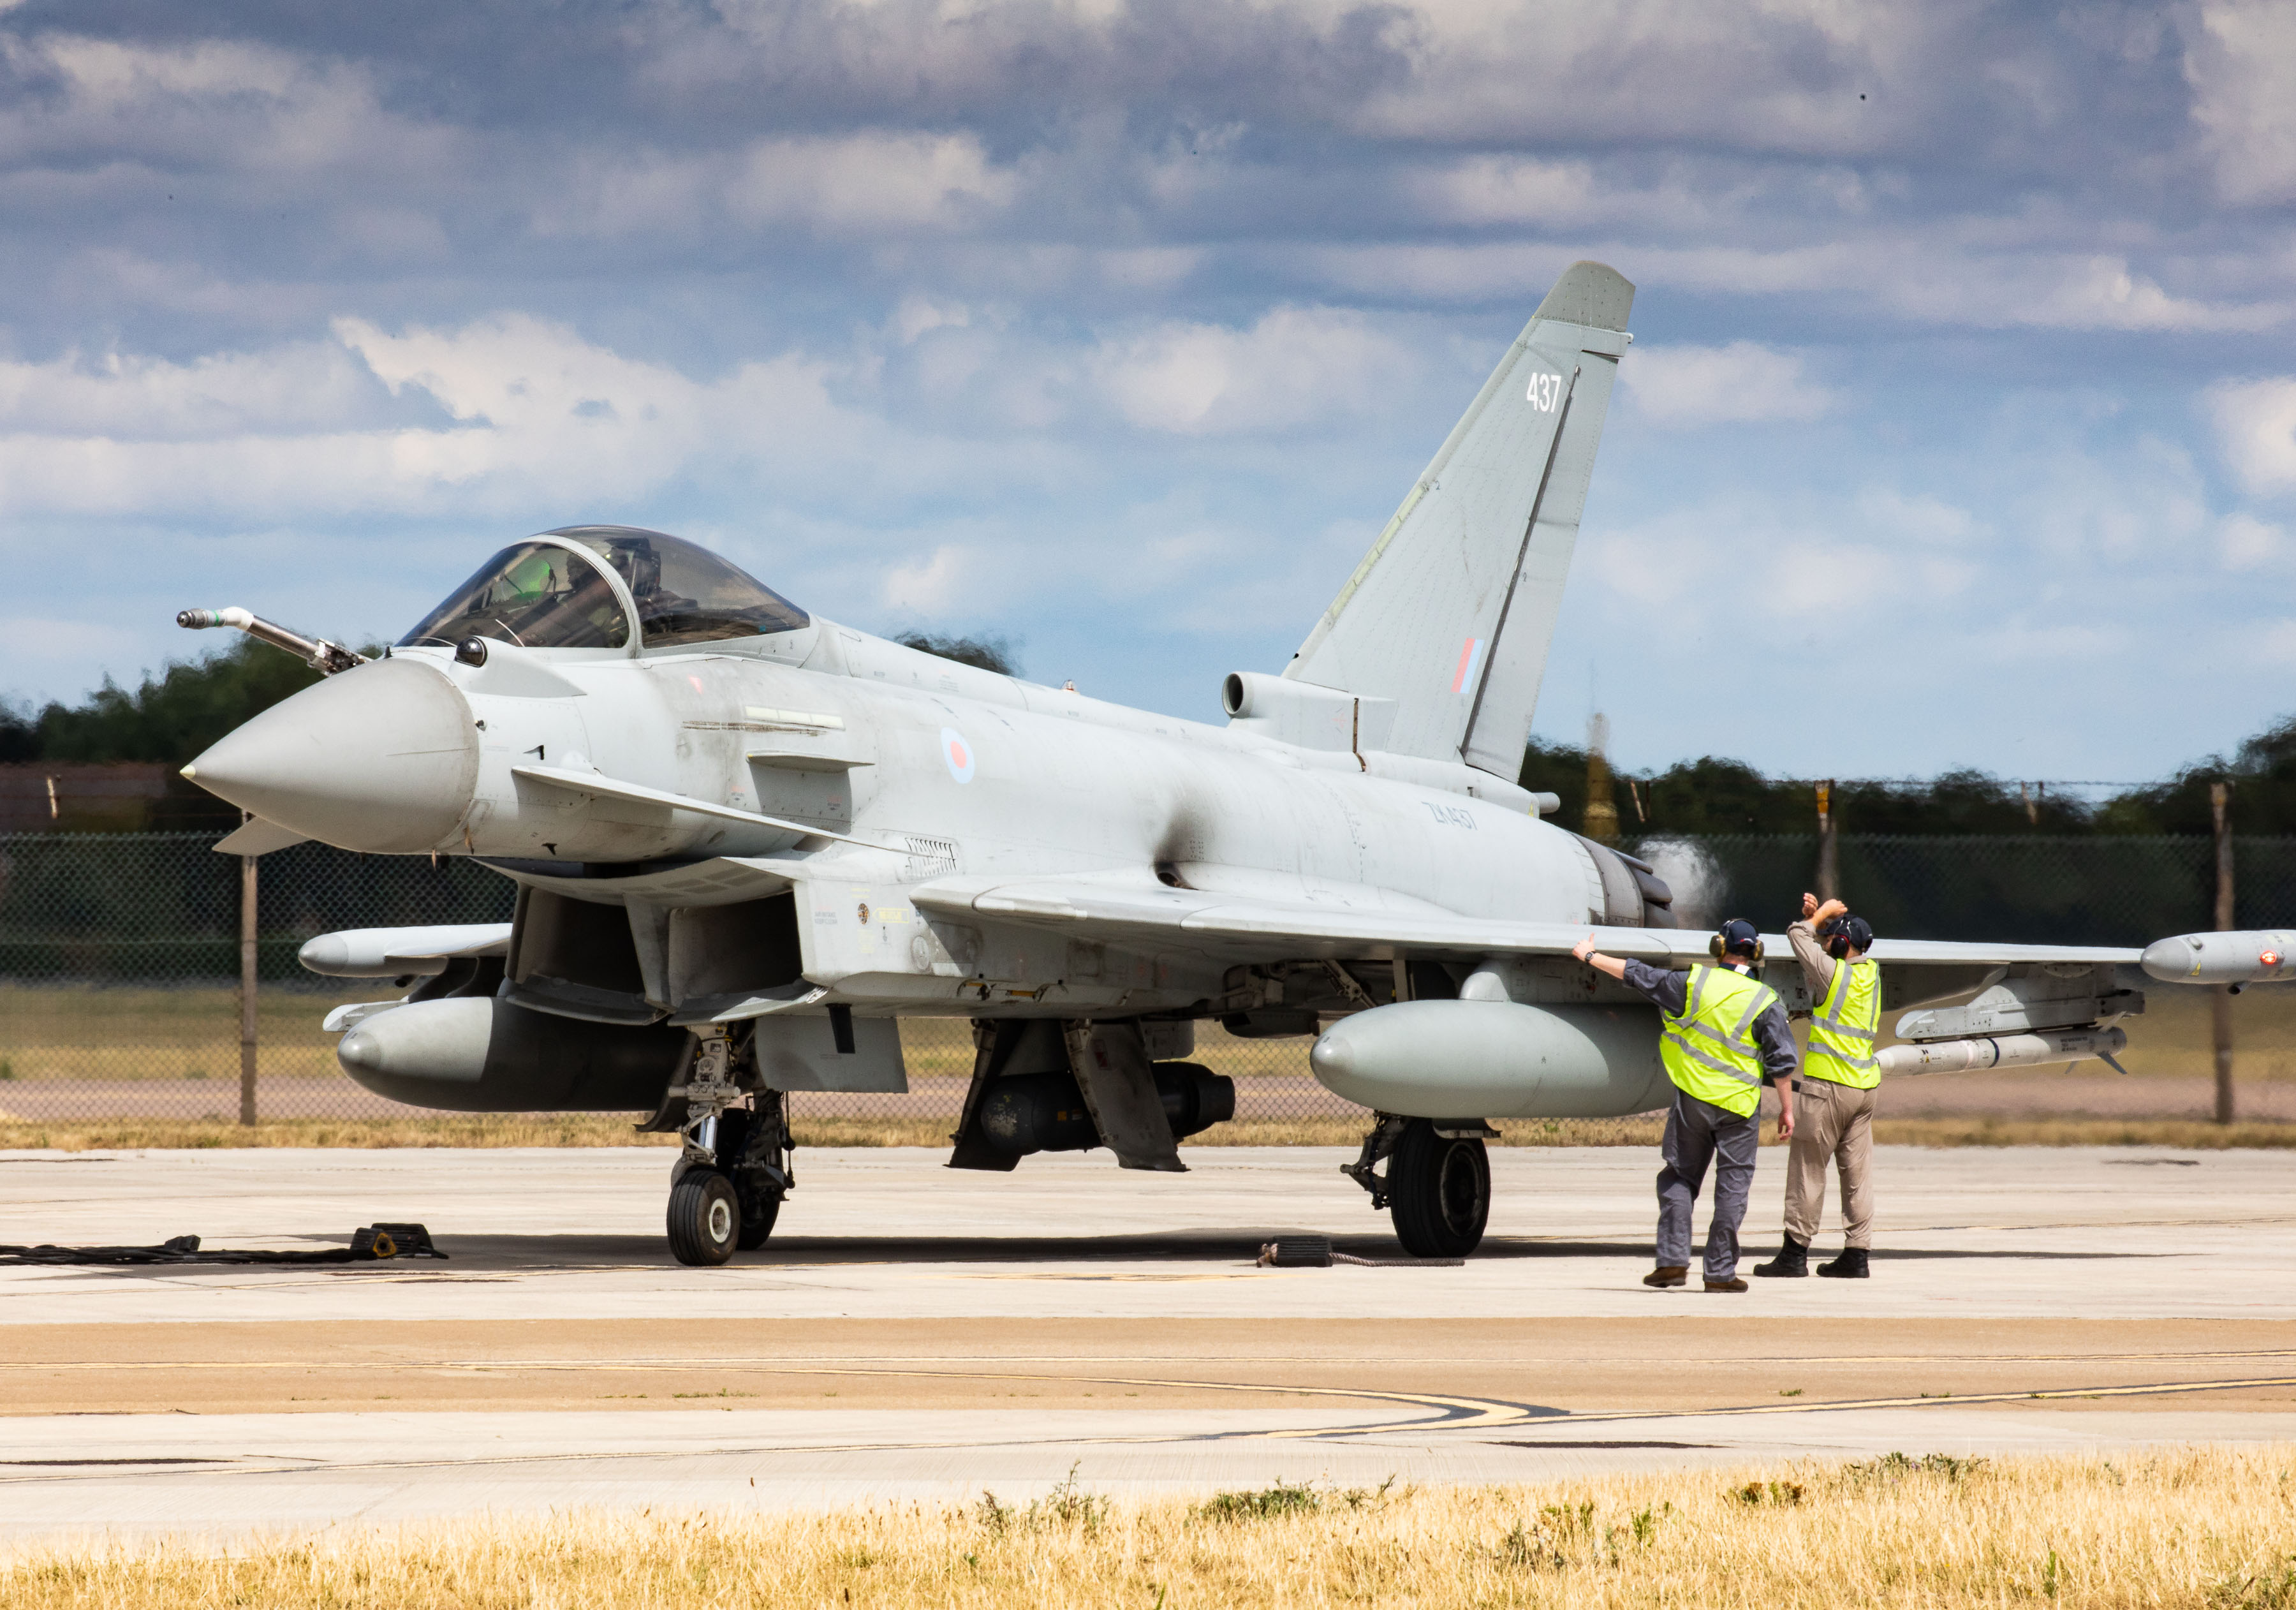 Image shows Typhoon on the airfield with ground crew.